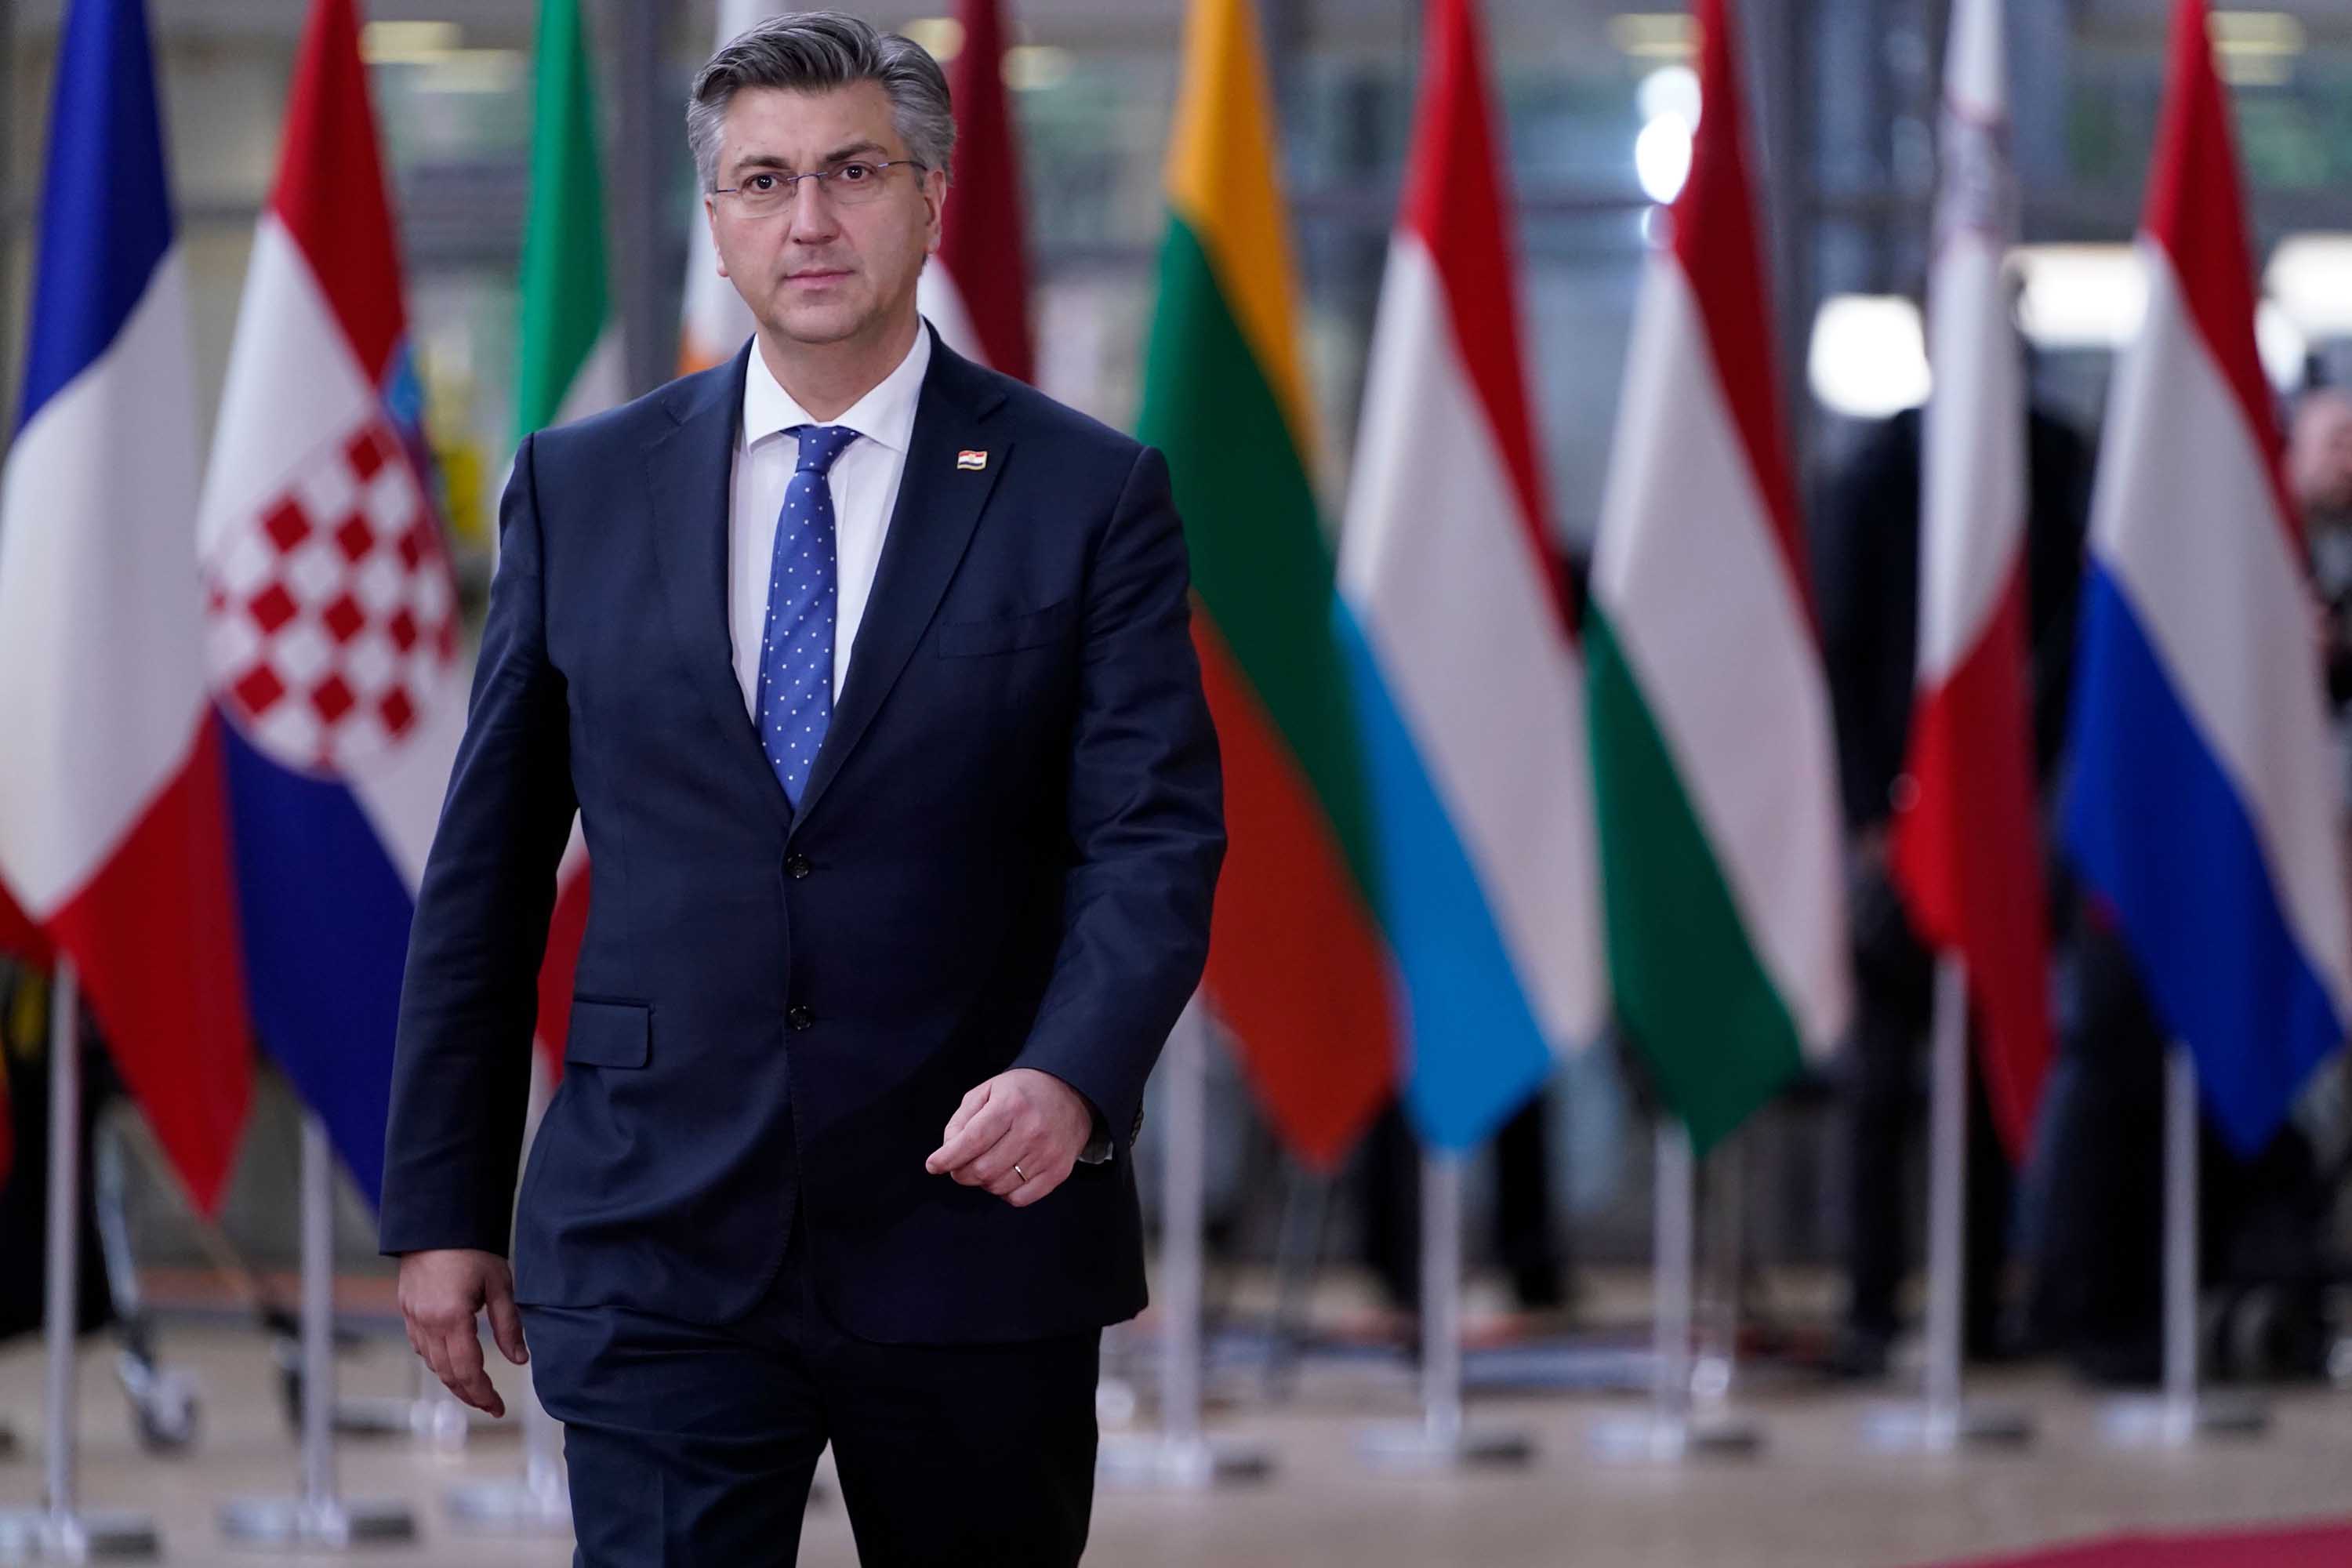 Croatia's Prime Minister Andrej Plenkovic arrives for a special European Council summit in Brussels, Belgium on February 20.